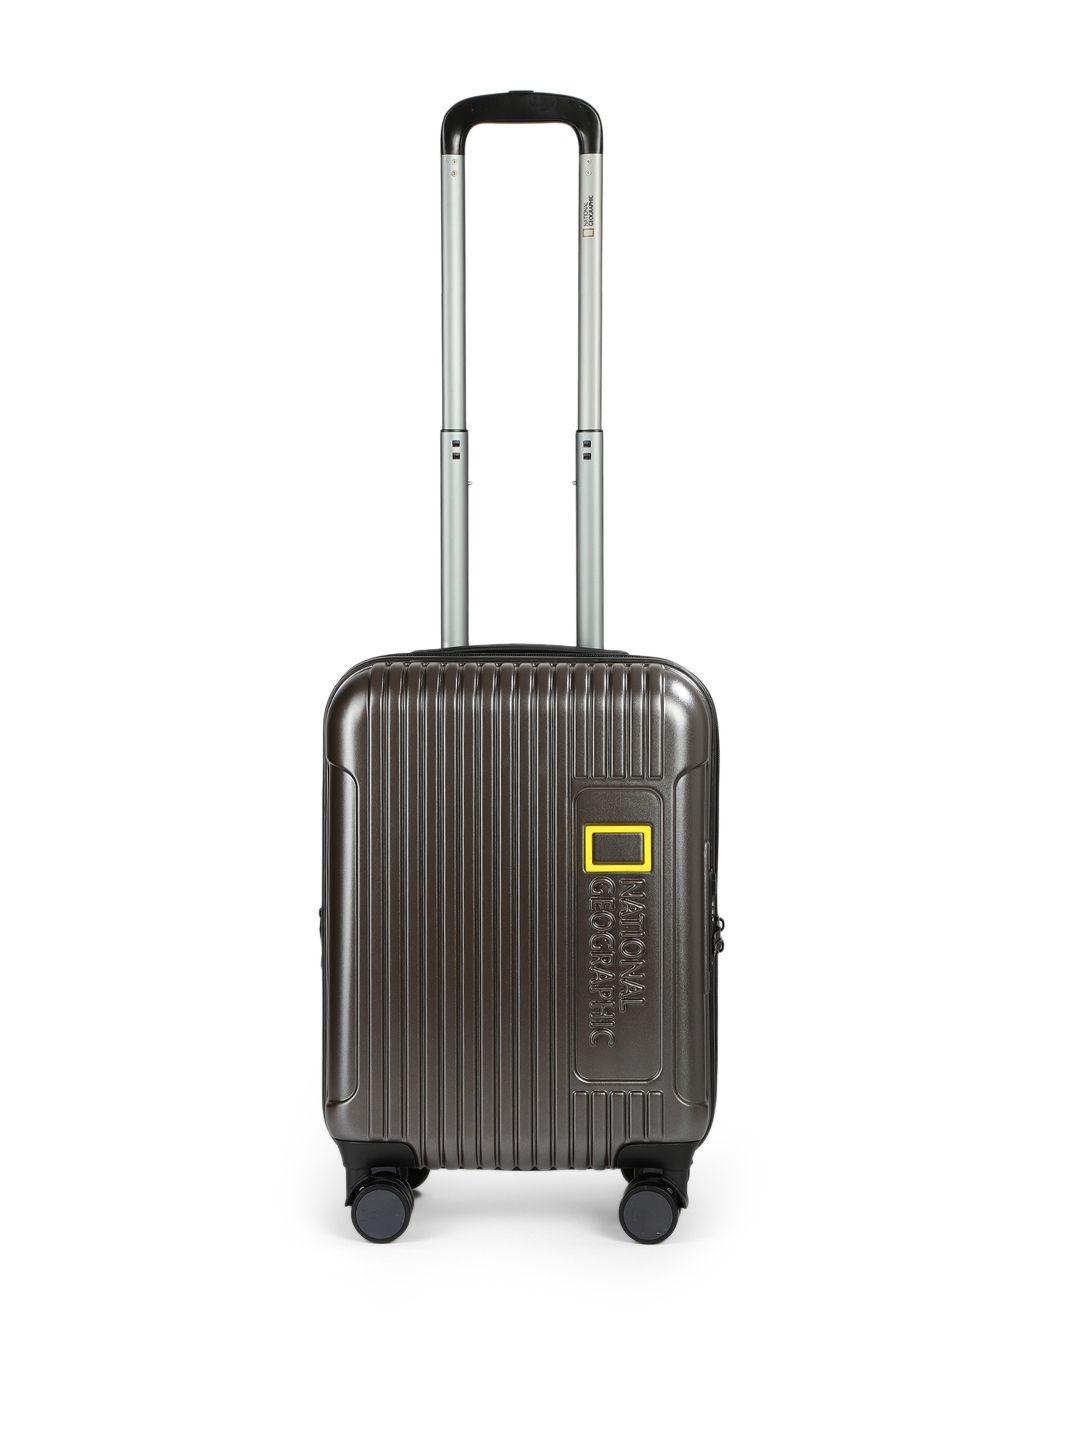 national geographic metallic compact trolley cabin suitcase